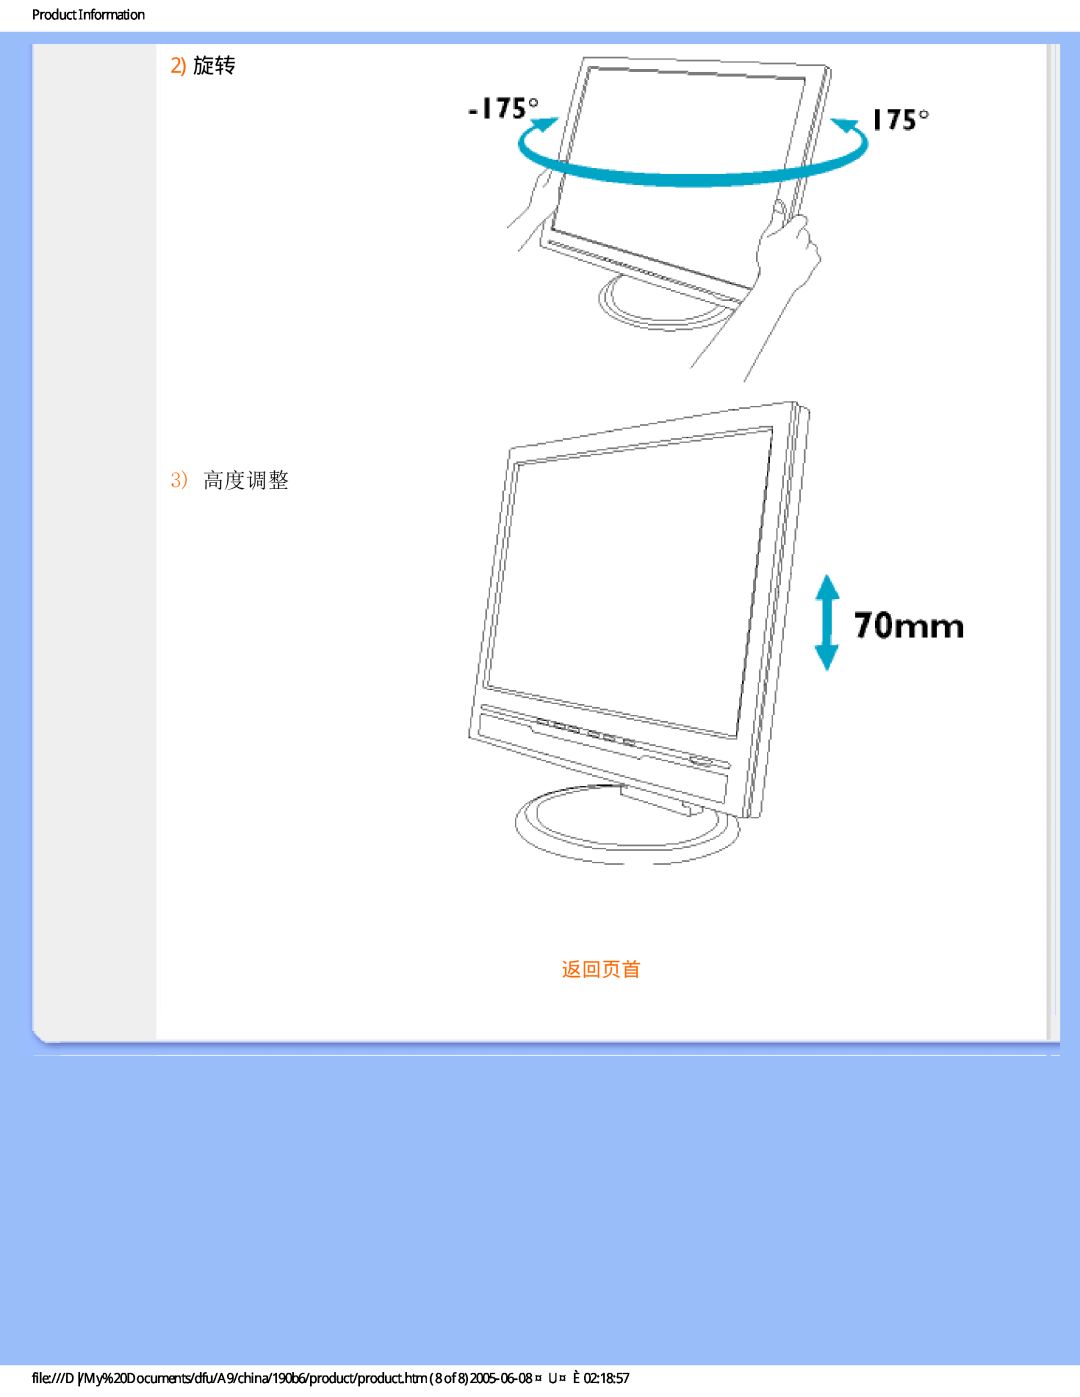 Philips 190B6 user manual 2 旋转 3 高度调整, 返回页首, Product Information 